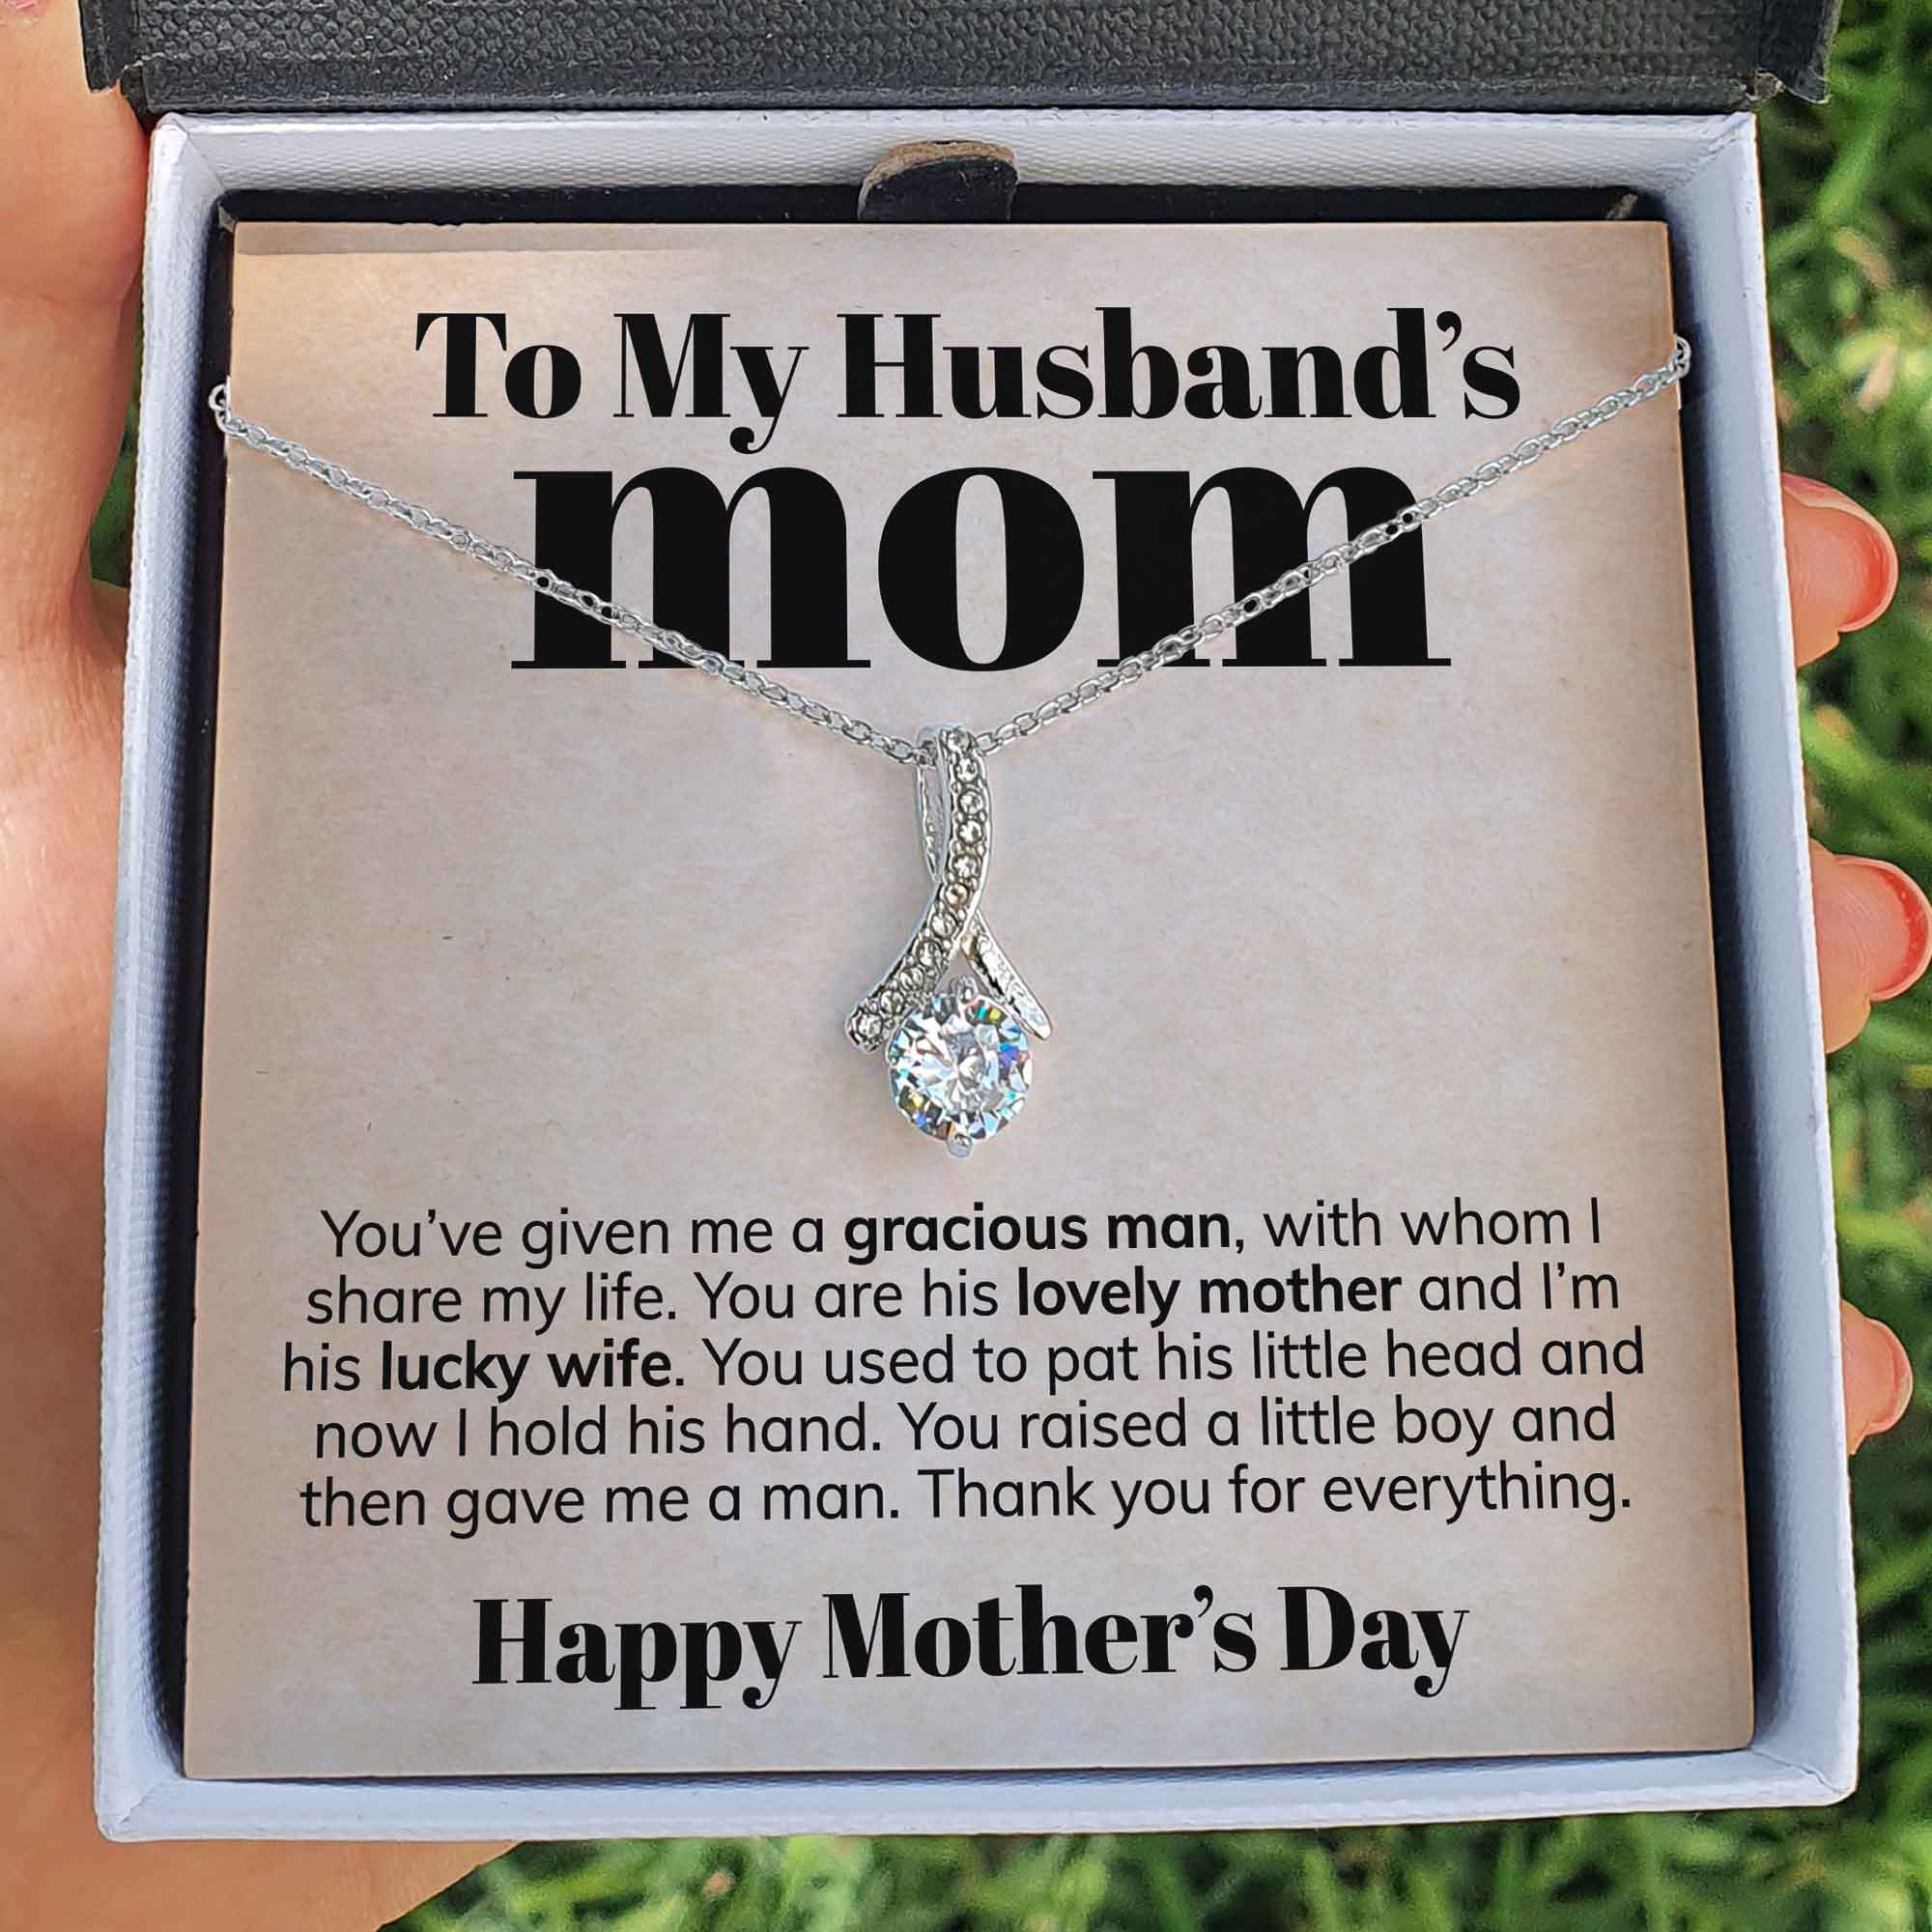 ShineOn Fulfillment Jewelry Standard Box To My Husband's Mom - Lucky Wife - Ribbon Necklace